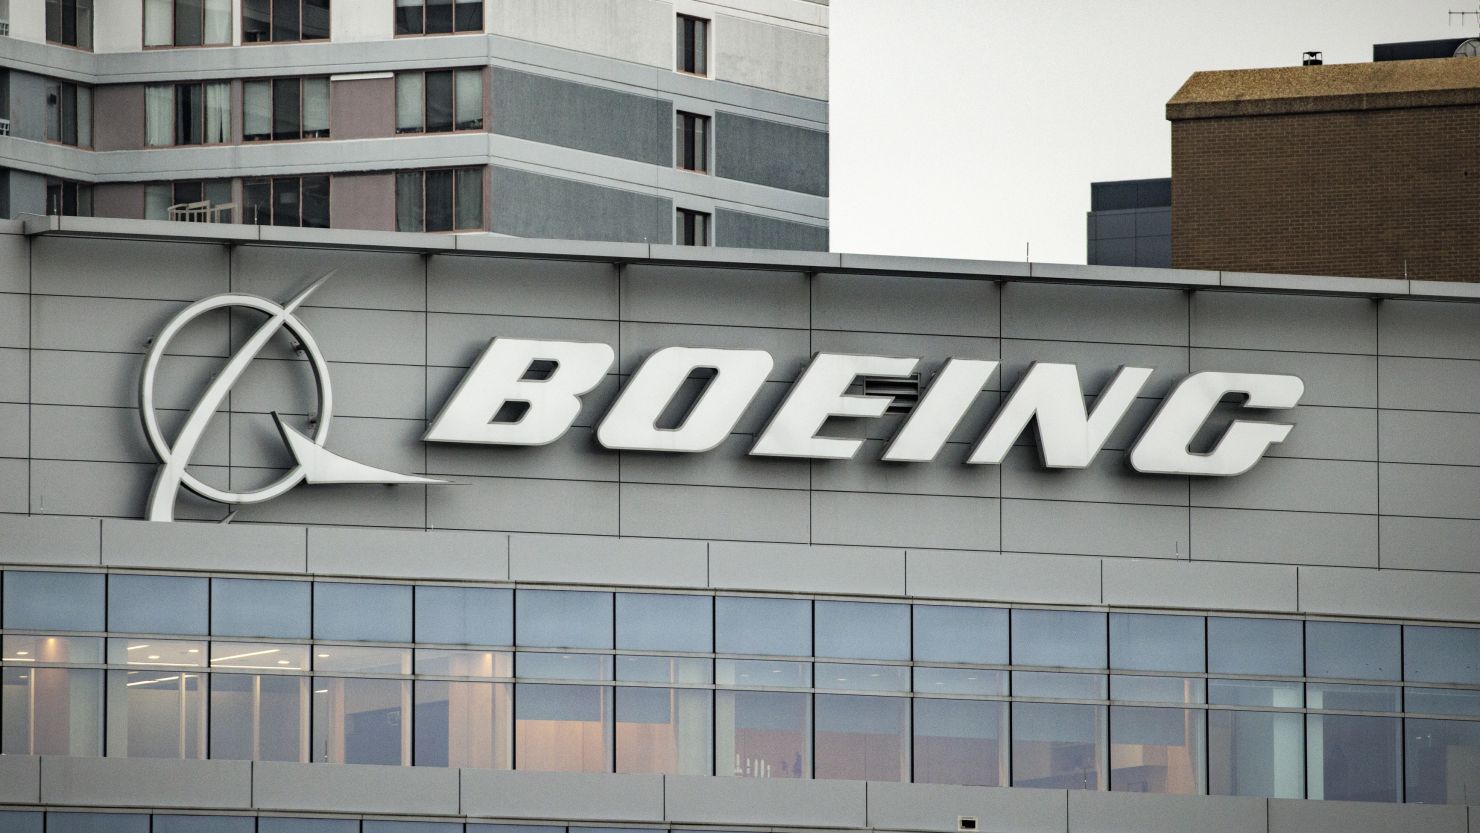 The headquarters for The Boeing Company in Arlington, Virginia.